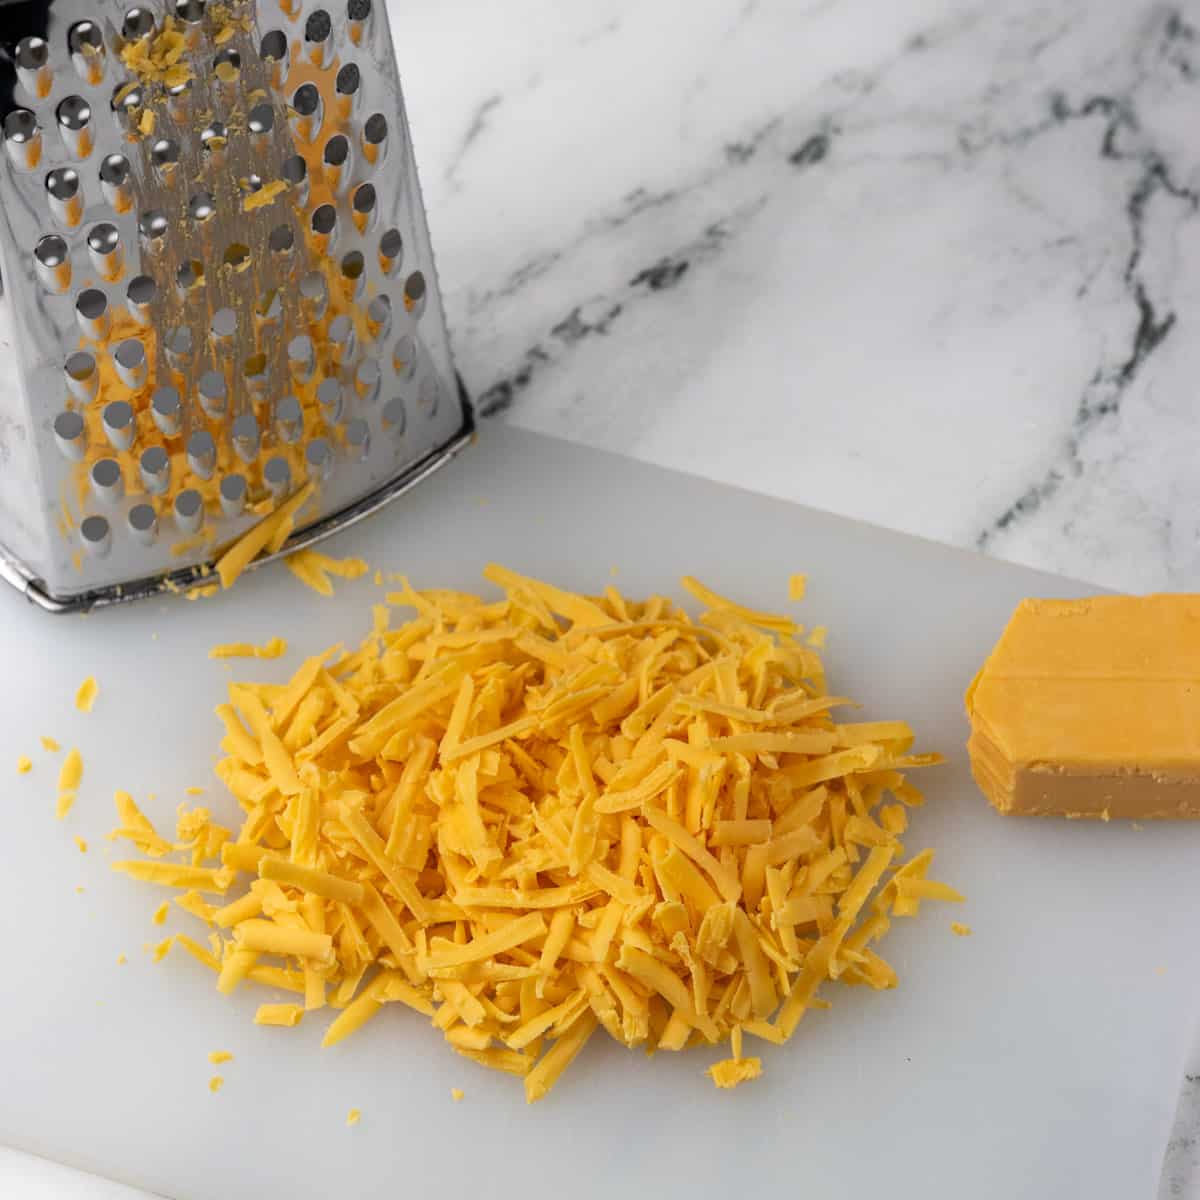 Shredded cheese with a grater